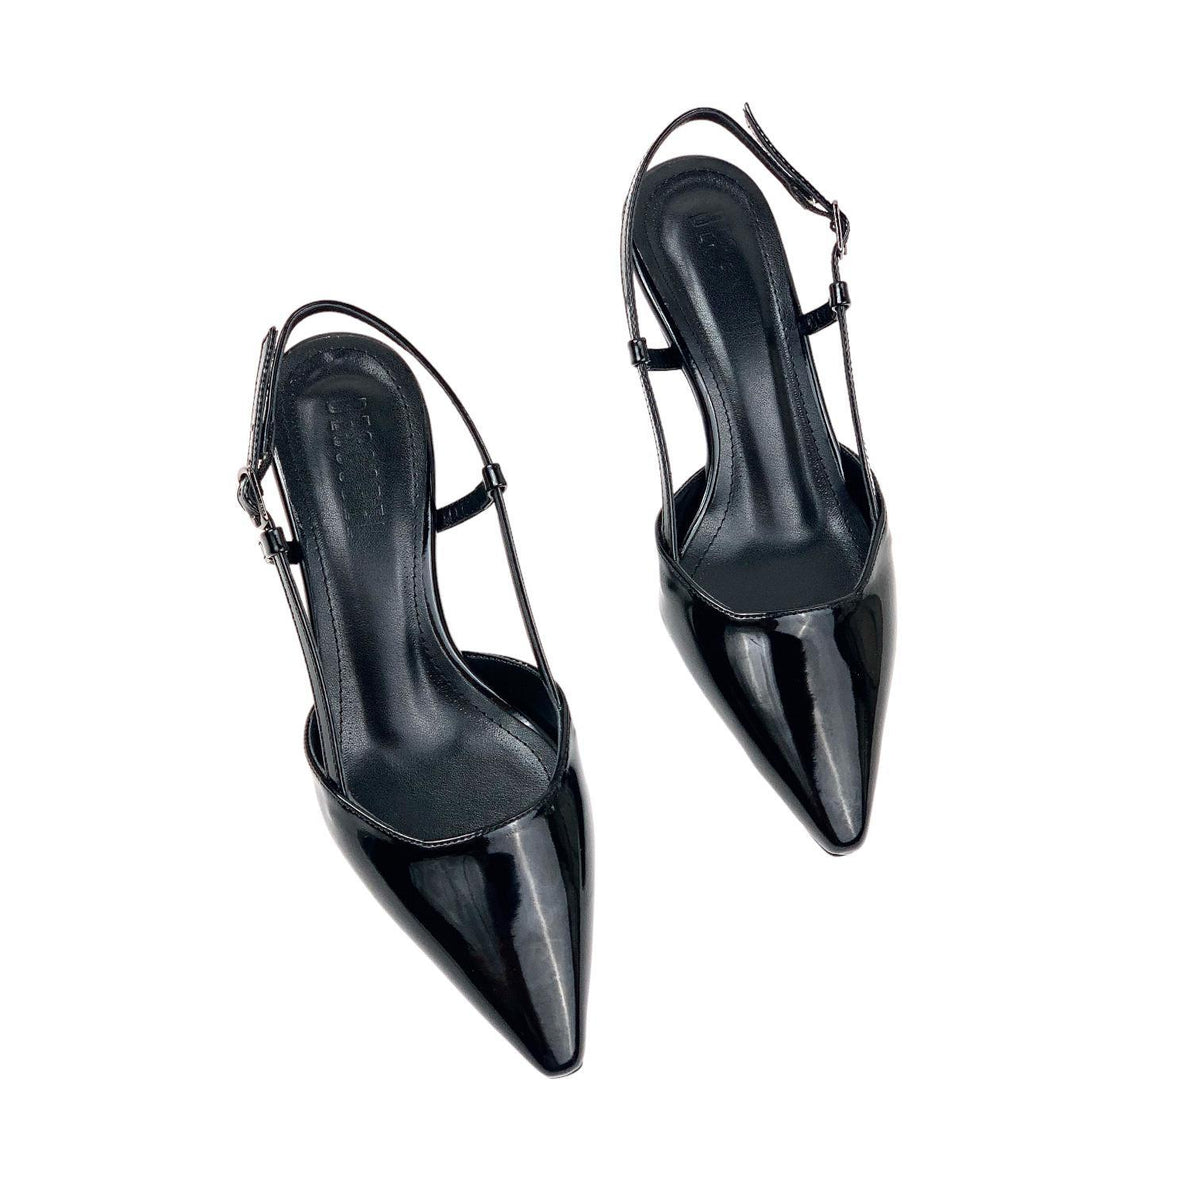 Women's Sedj Black Patent Leather Material Open Back Almond Heel Shoes 5.5 Cm - STREETMODE ™